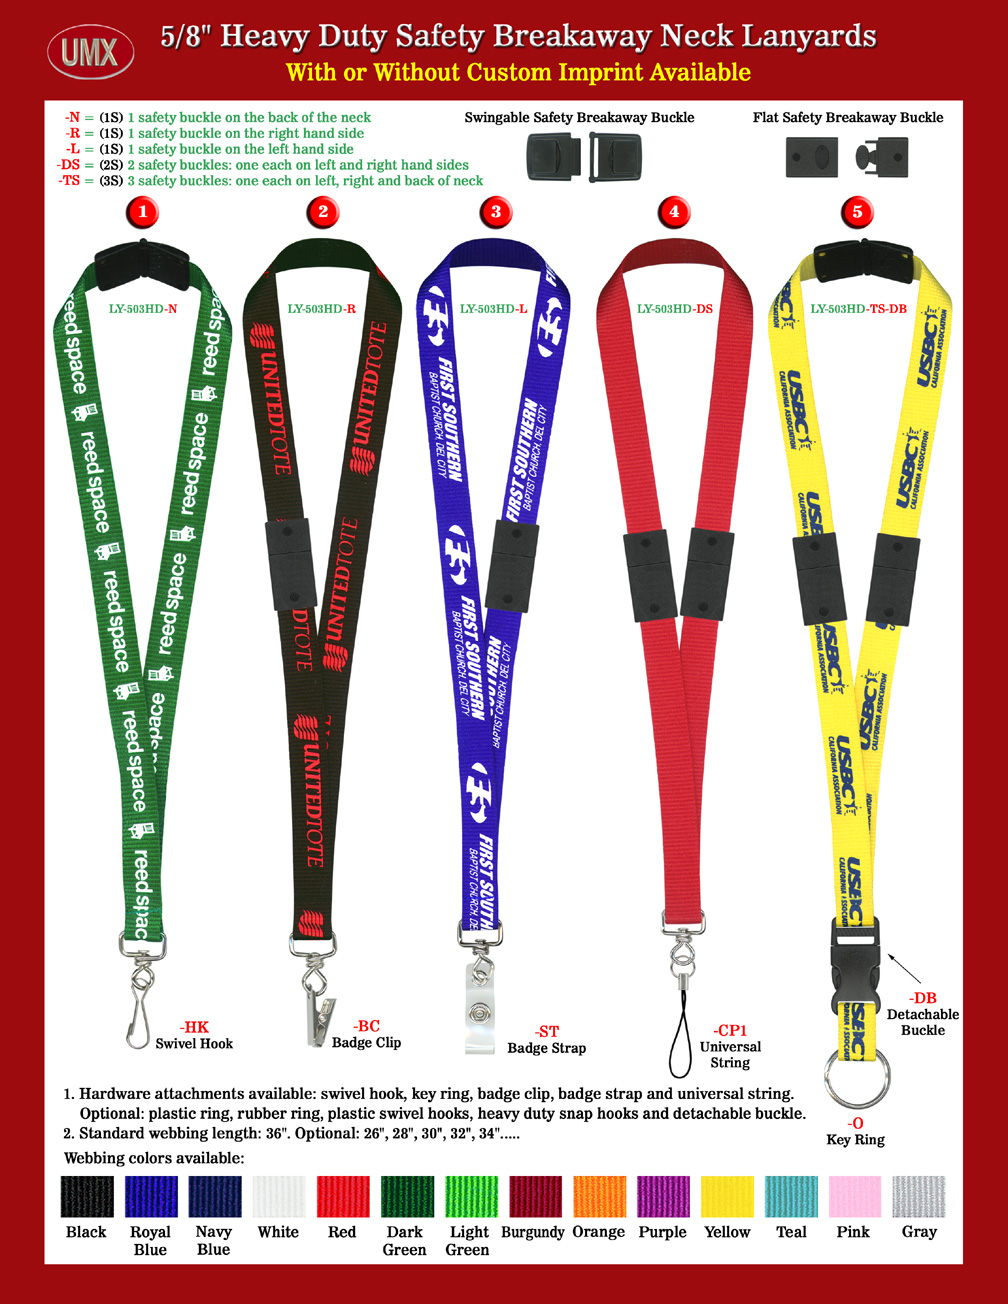 5/8" LY-503HD Most Popular Safety Name Badge Neck Lanyards.